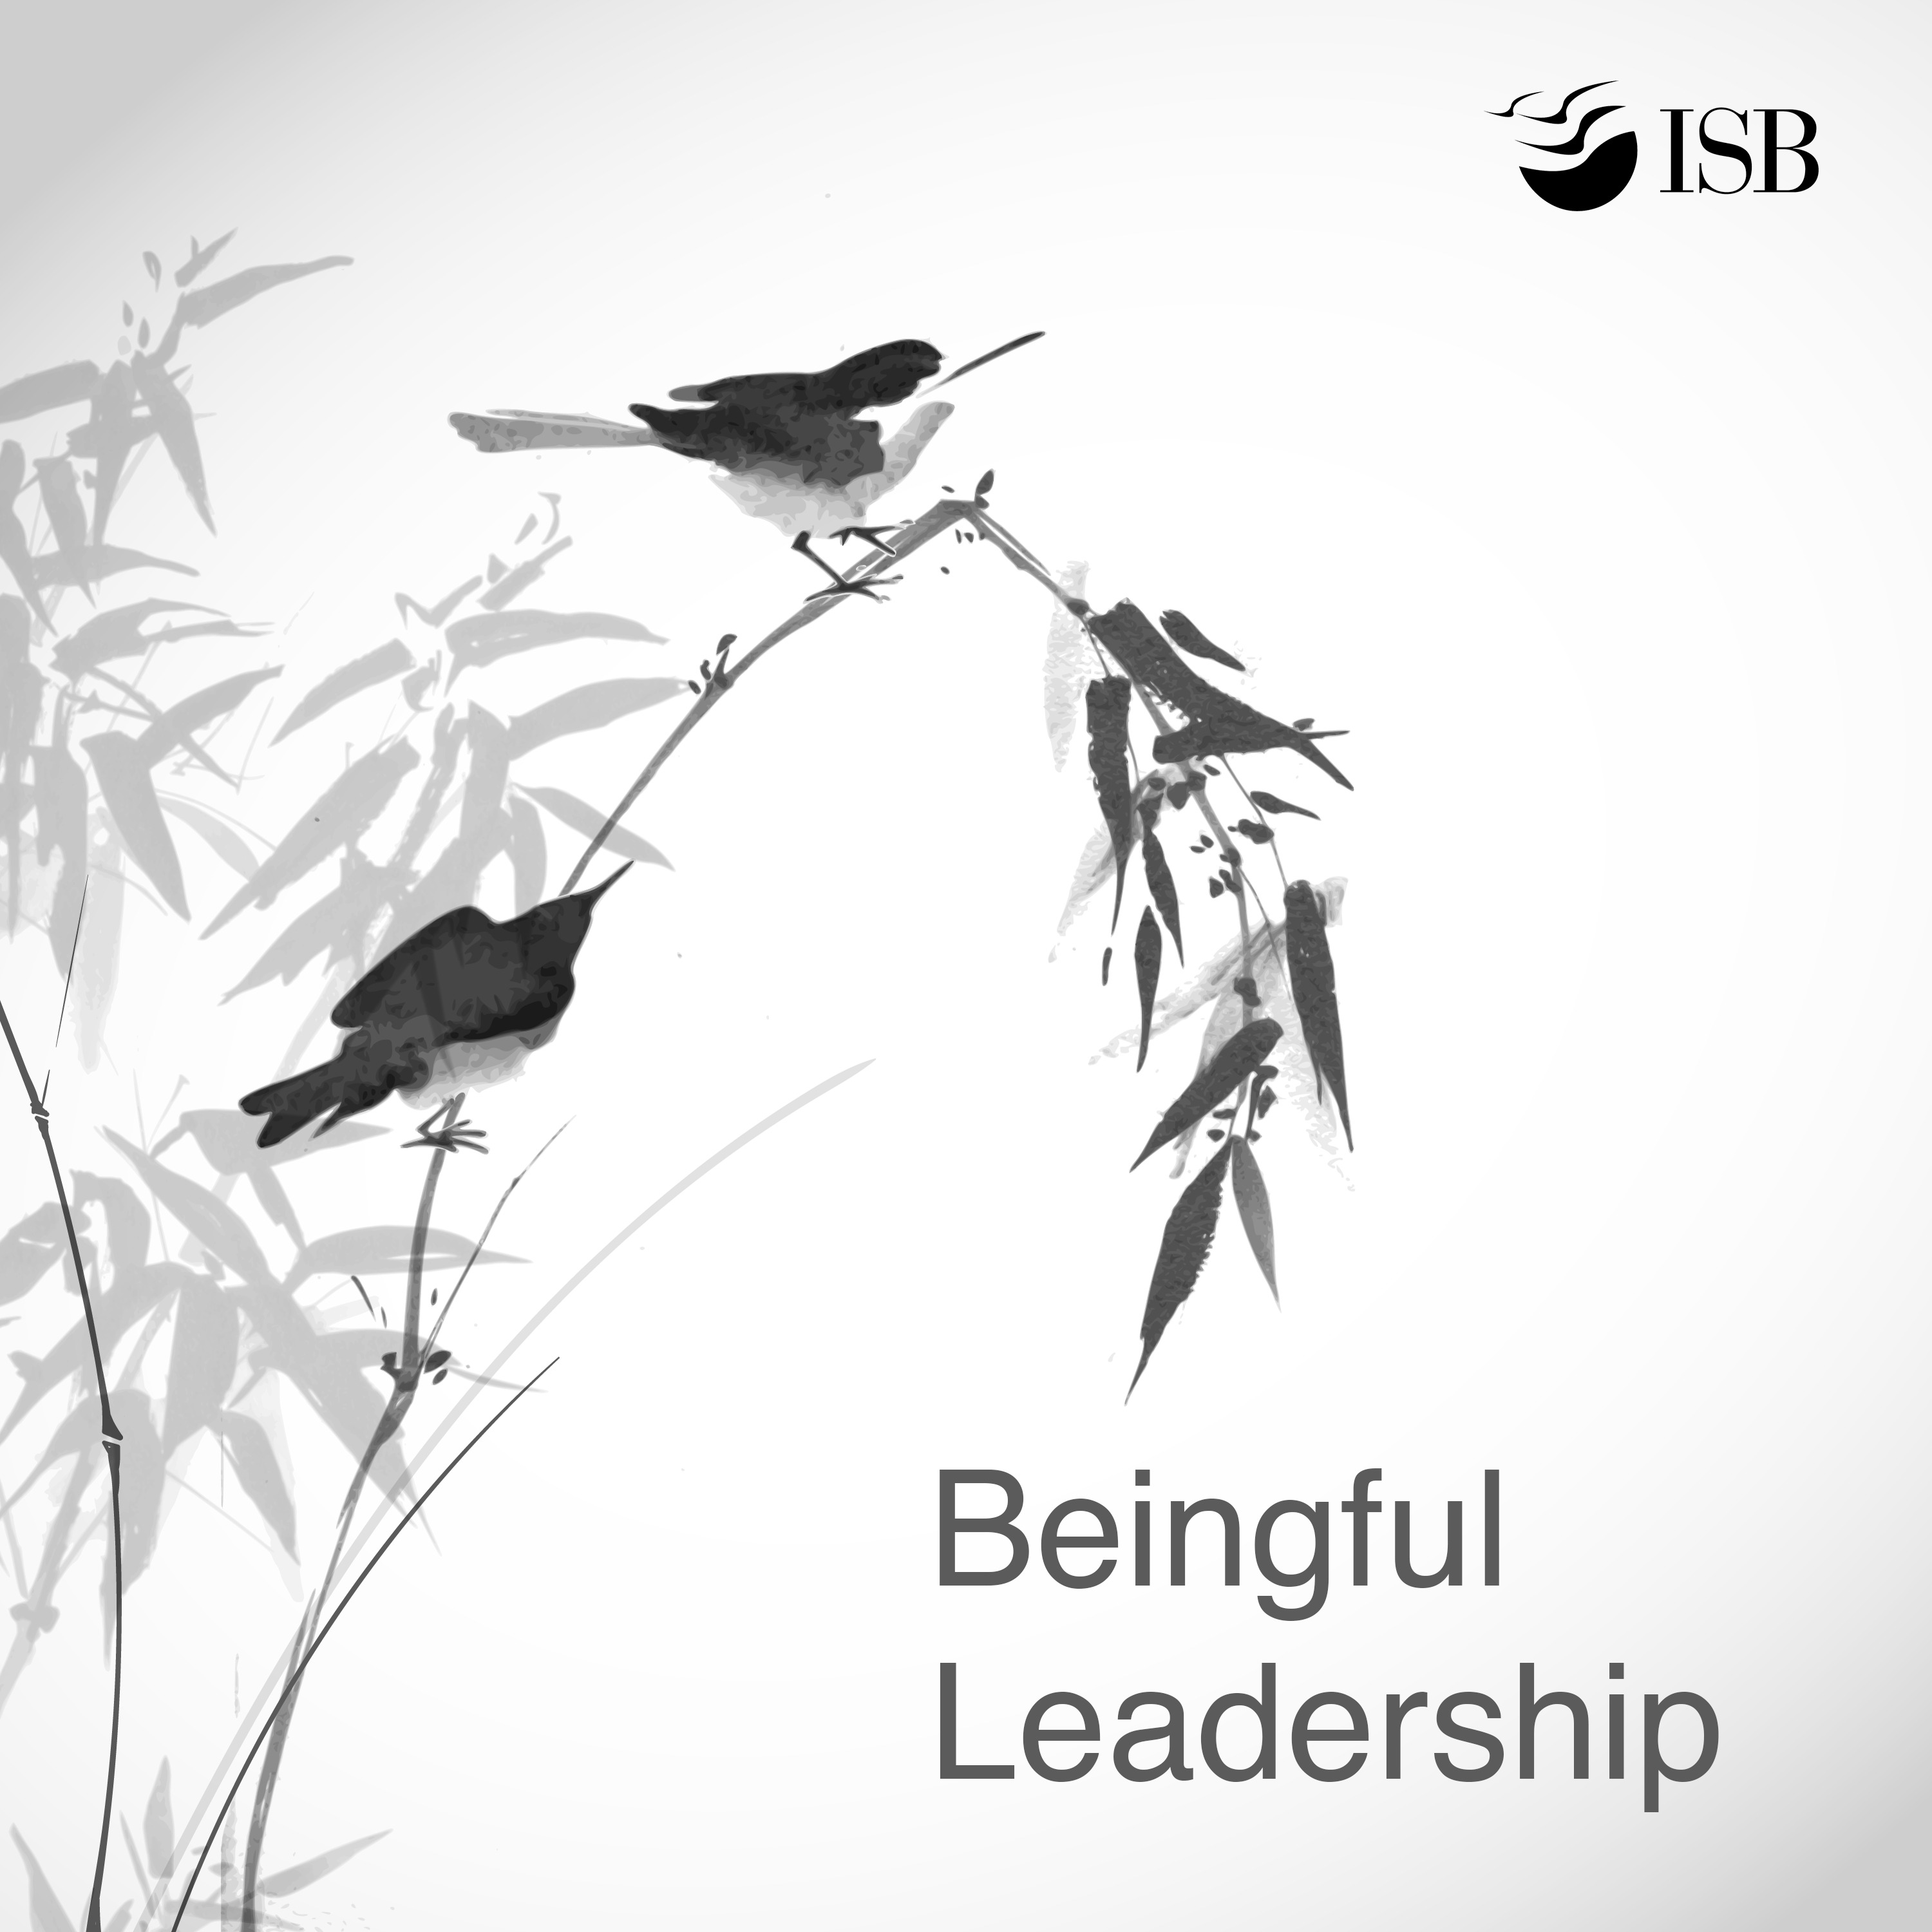 Artwork for Beingful Leadership by Indian School of Business (ISB)